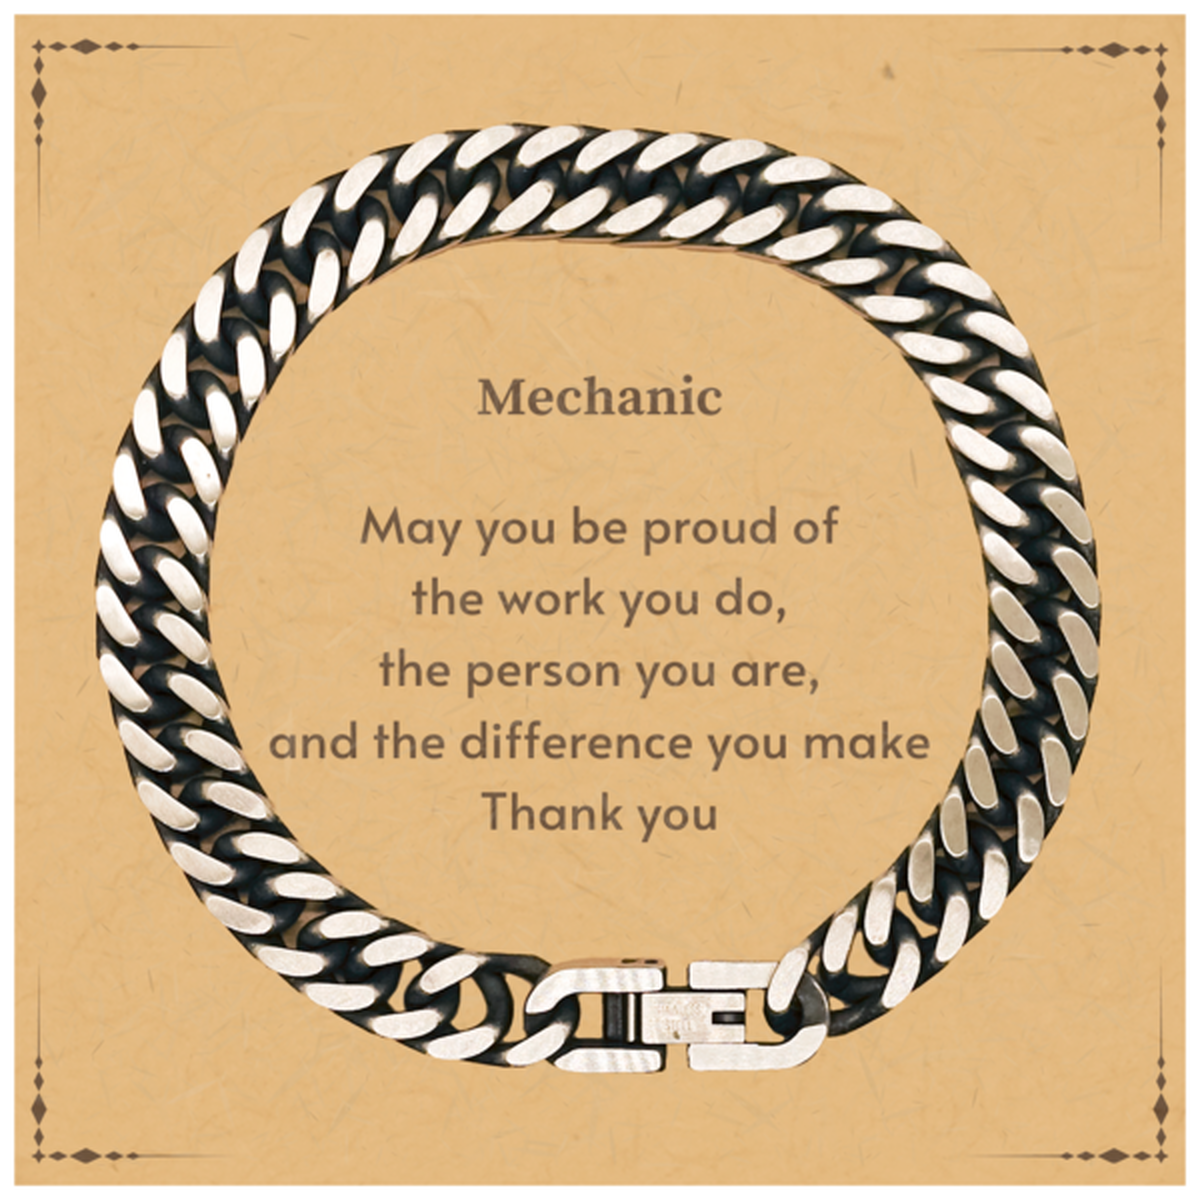 Heartwarming Cuban Link Chain Bracelet Retirement Coworkers Gifts for Mechanic, Mechanic May You be proud of the work you do, the person you are Gifts for Boss Men Women Friends